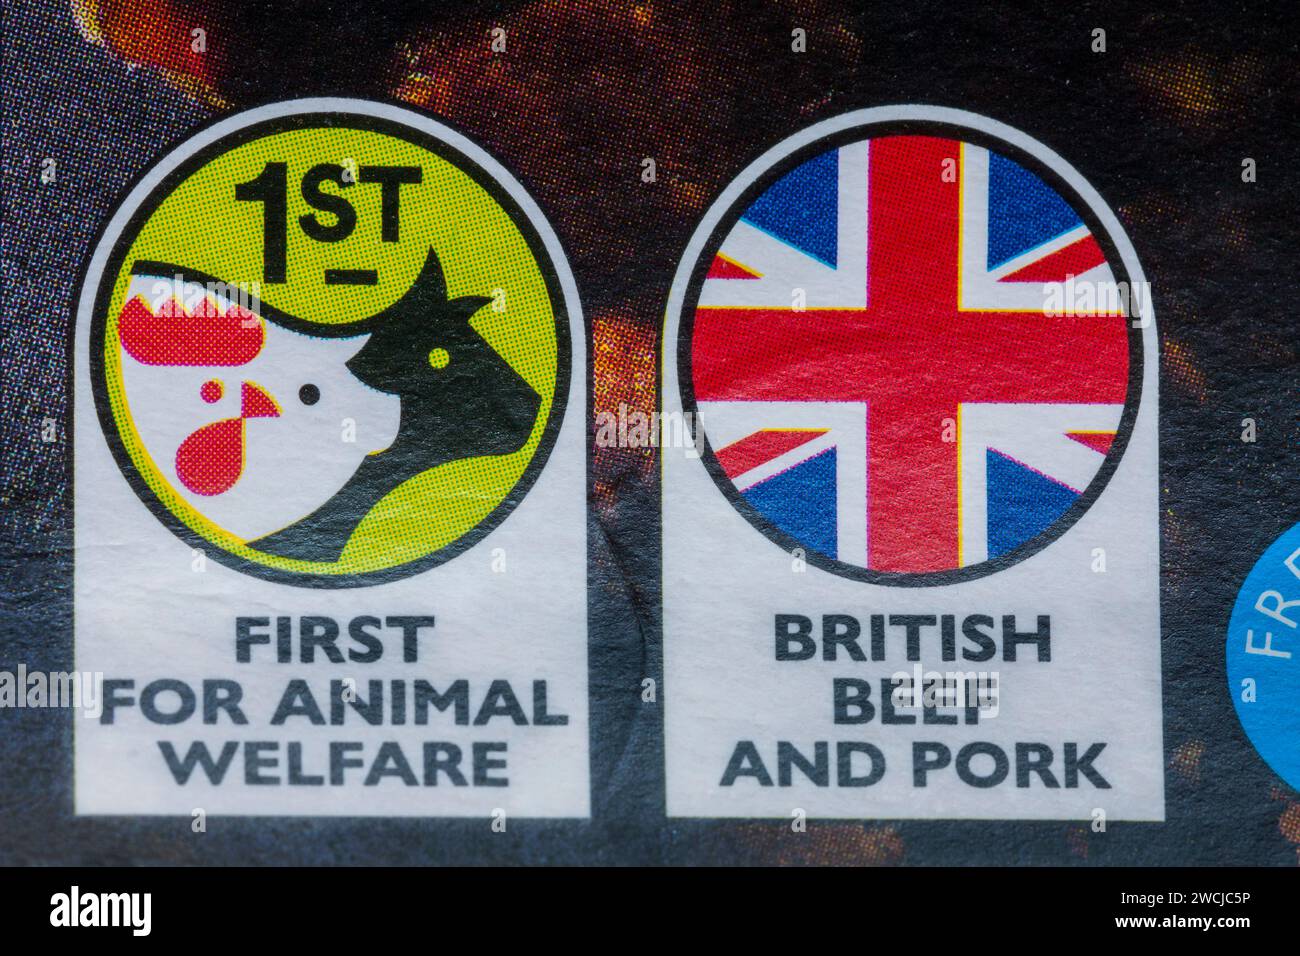 1st First for animal welfare & British Beef and Pork symbols on box of Slow-cooked Steak & Red Wine Pie from Waitrose Stock Photo